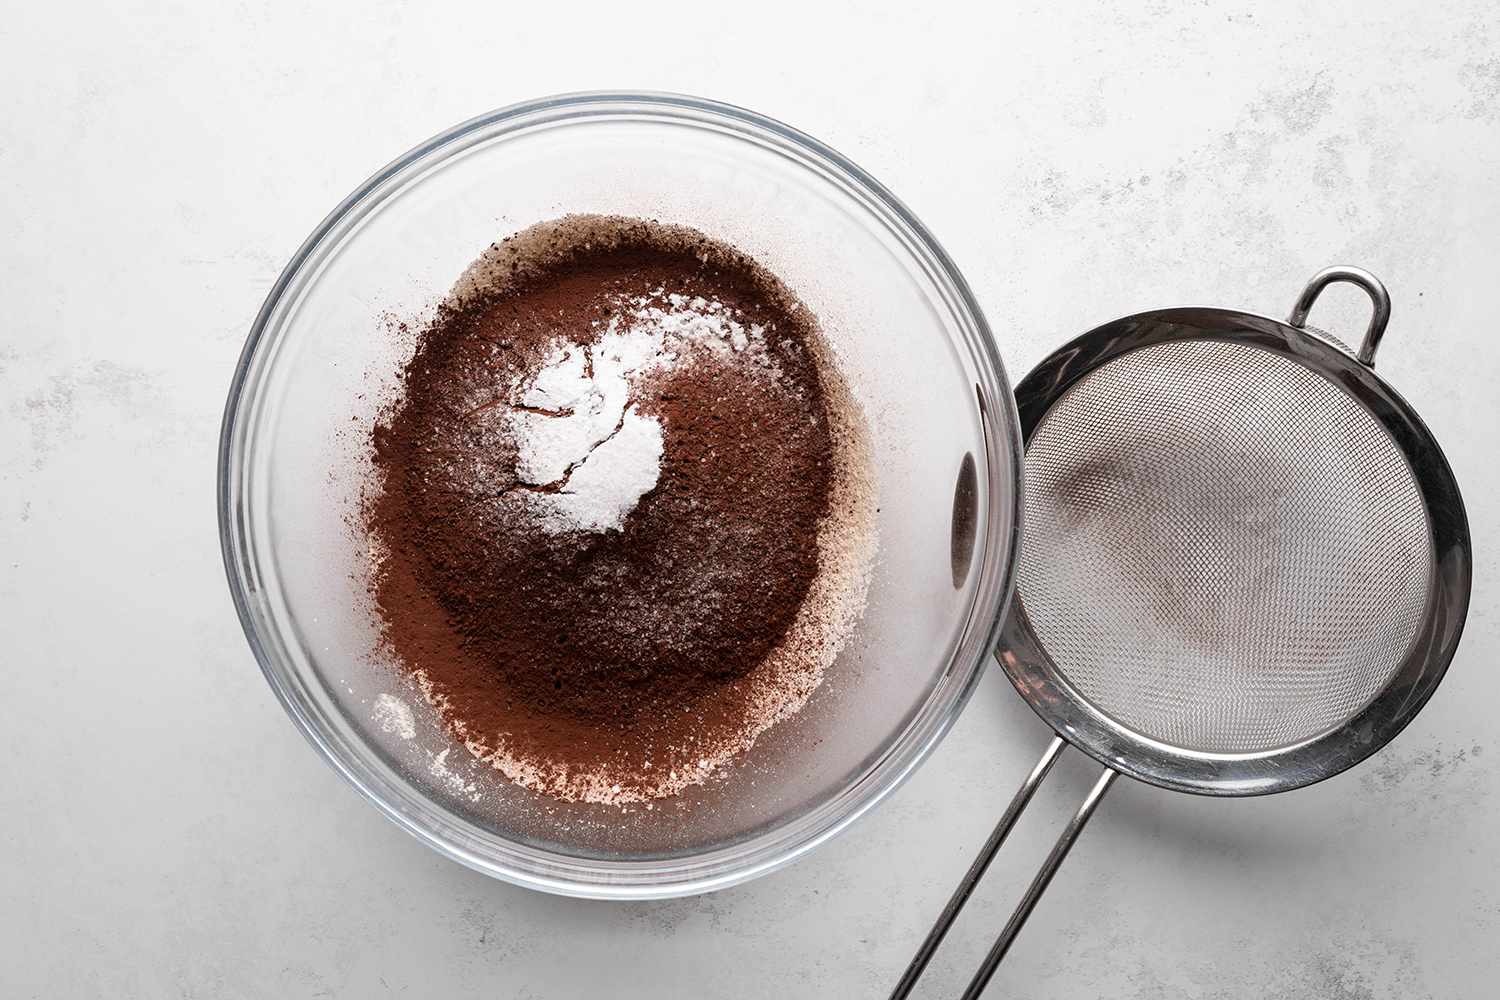 Flour, cocoa powder, baking soda, and salt in a glass bowl, next to a mesh strainer